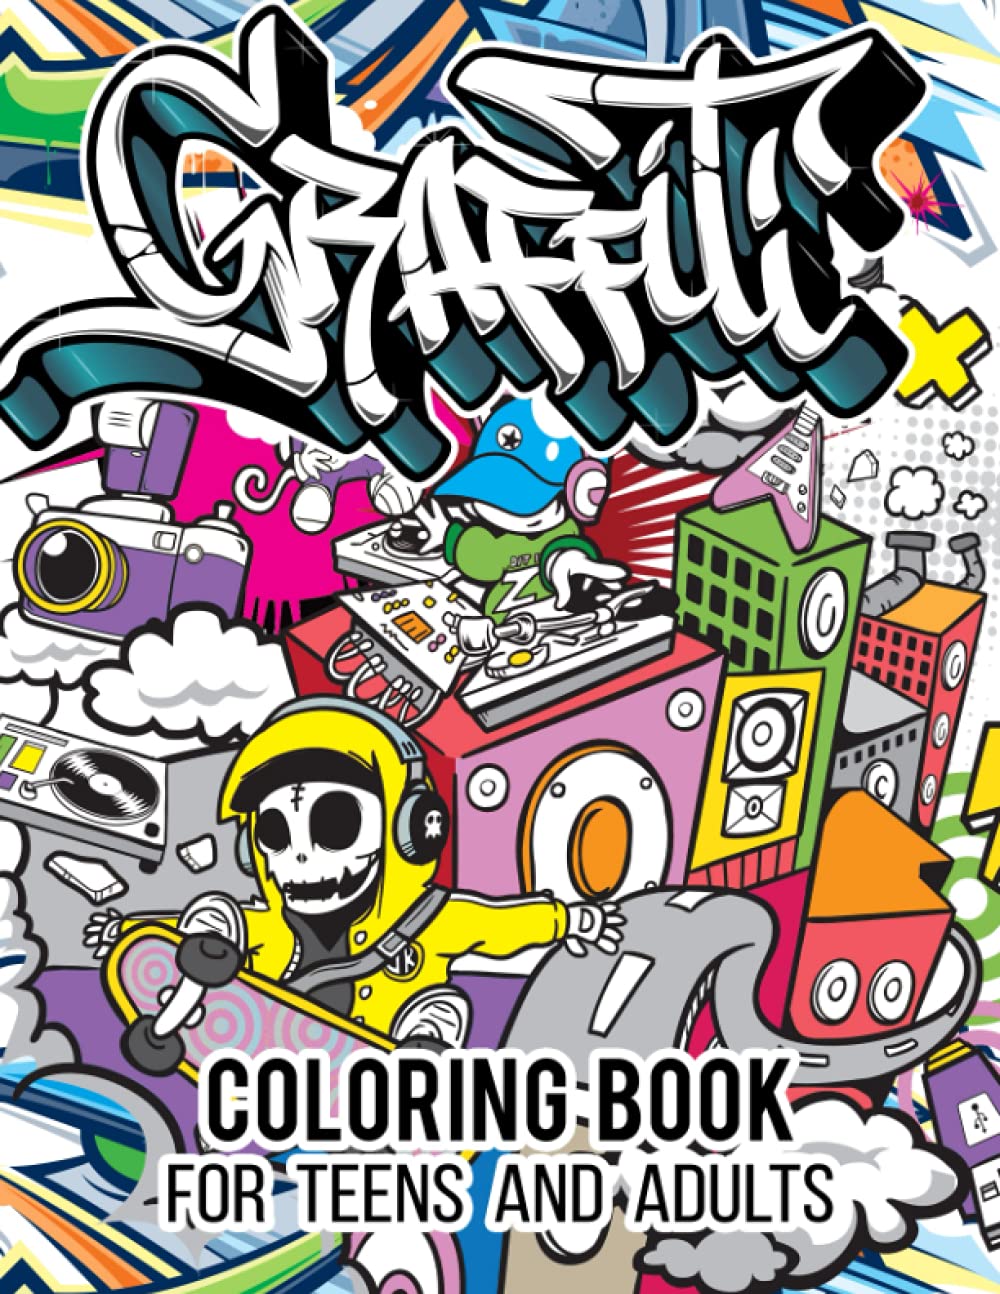 Graffiti coloring book for teens and adults a collection of fun street art coloring pages with graffiti designs such as letters drawings fonts quotes and more by lifestyle graffiti press